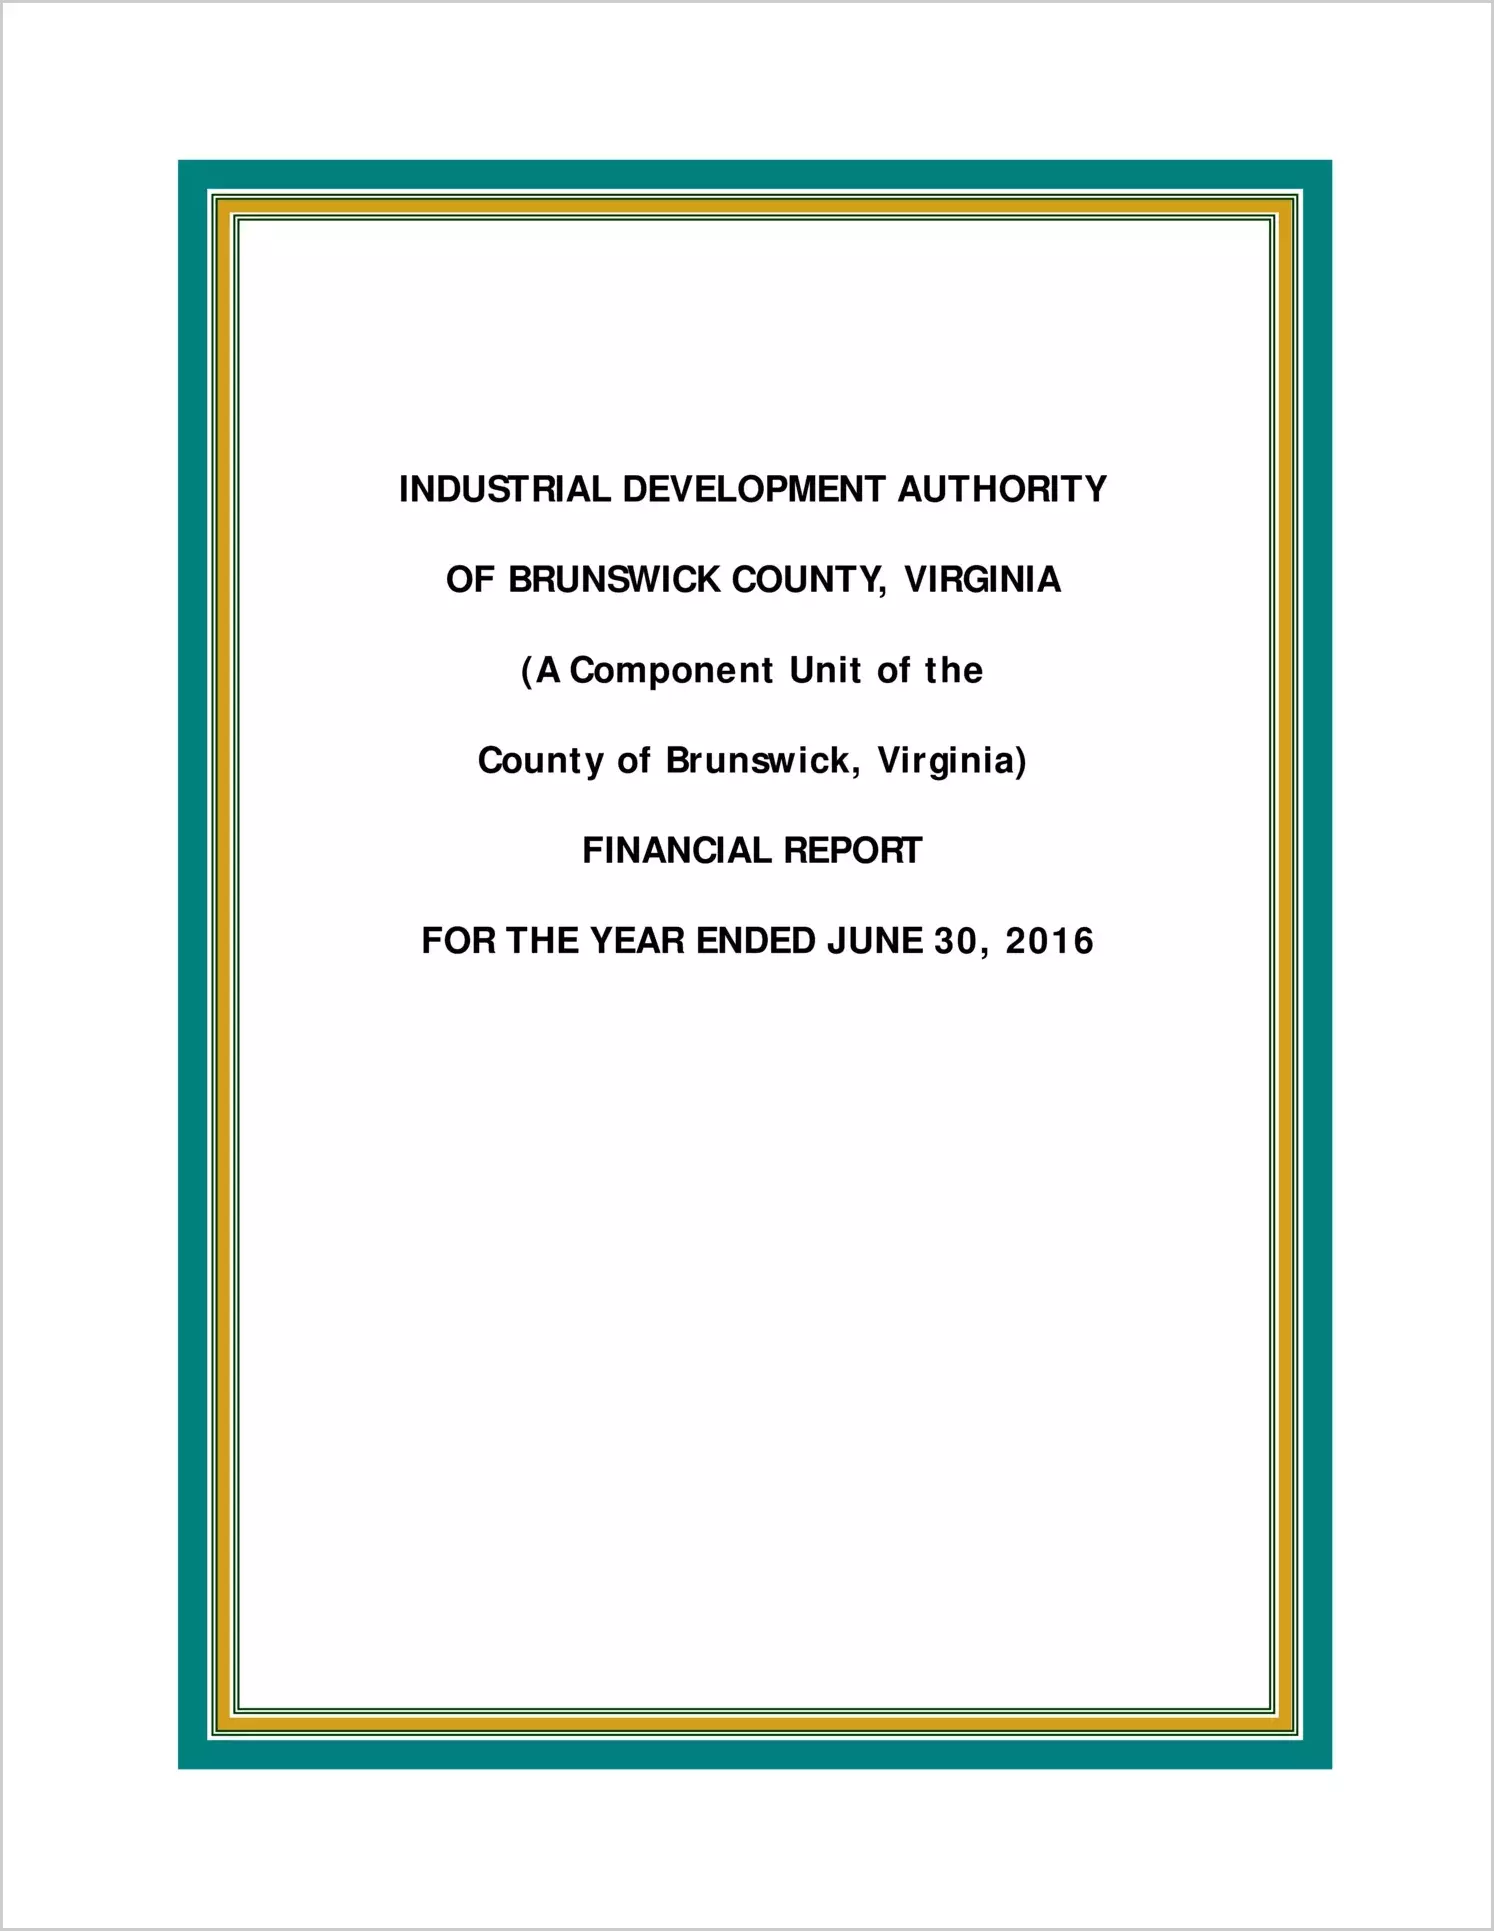 2016 ABC/Other Annual Financial Report  for Brunswick Industrial Development Authority